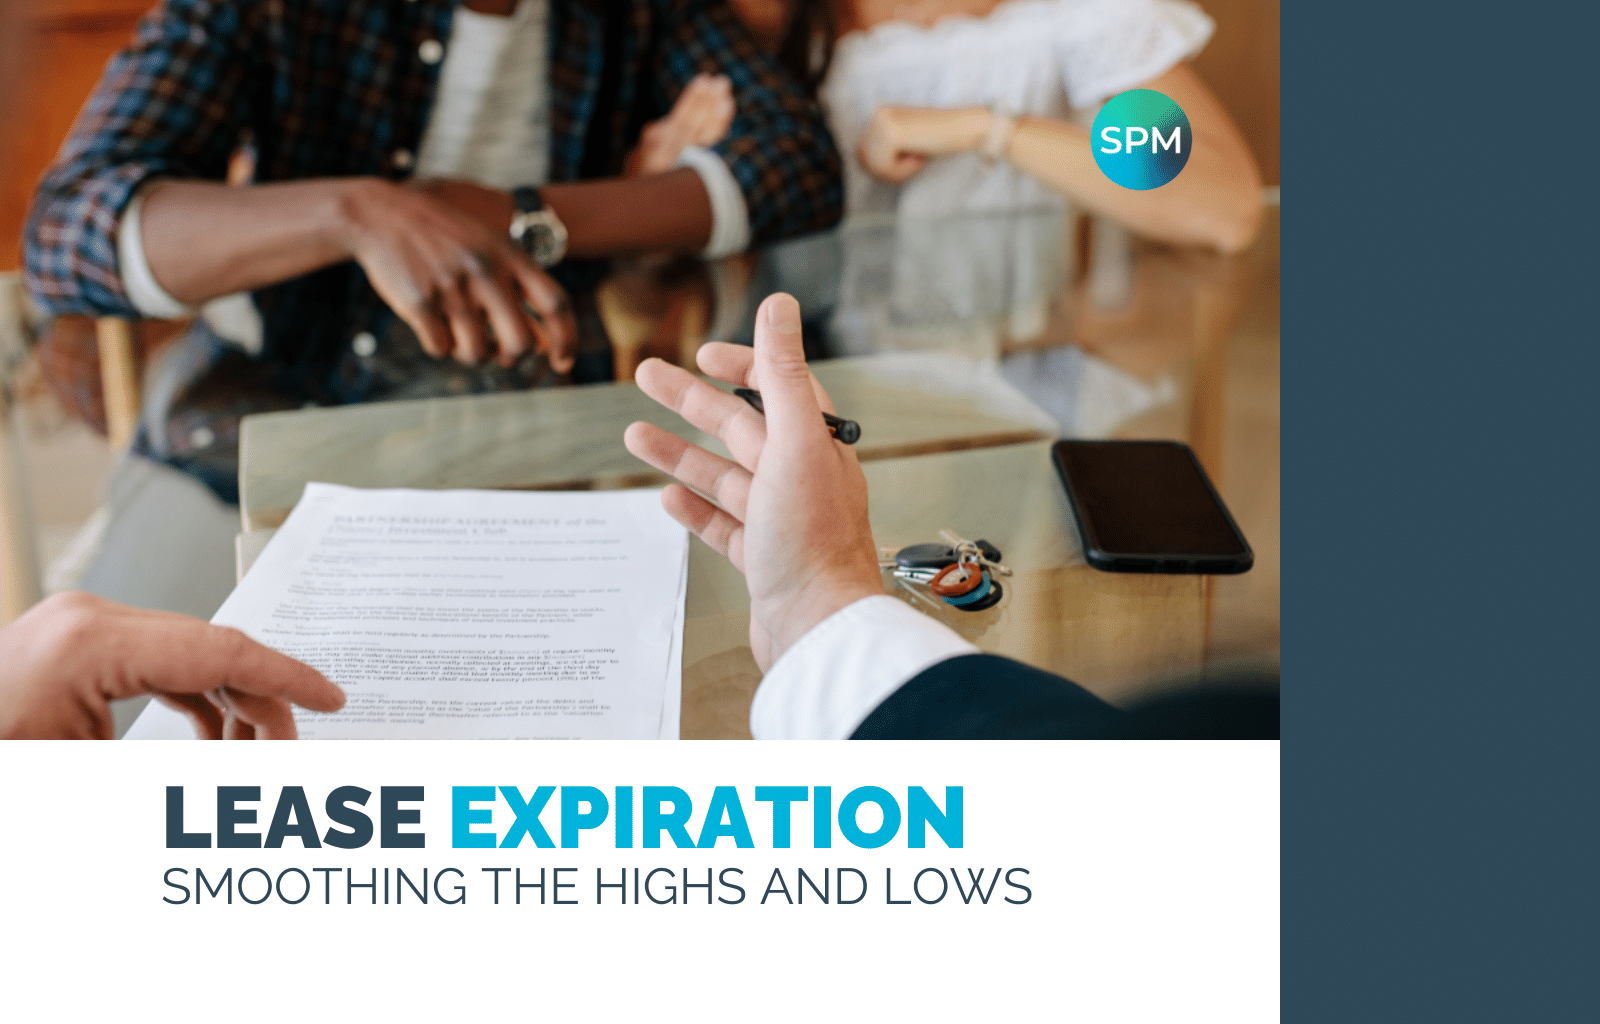 Lease Expiration - Smoothing the highs and lows